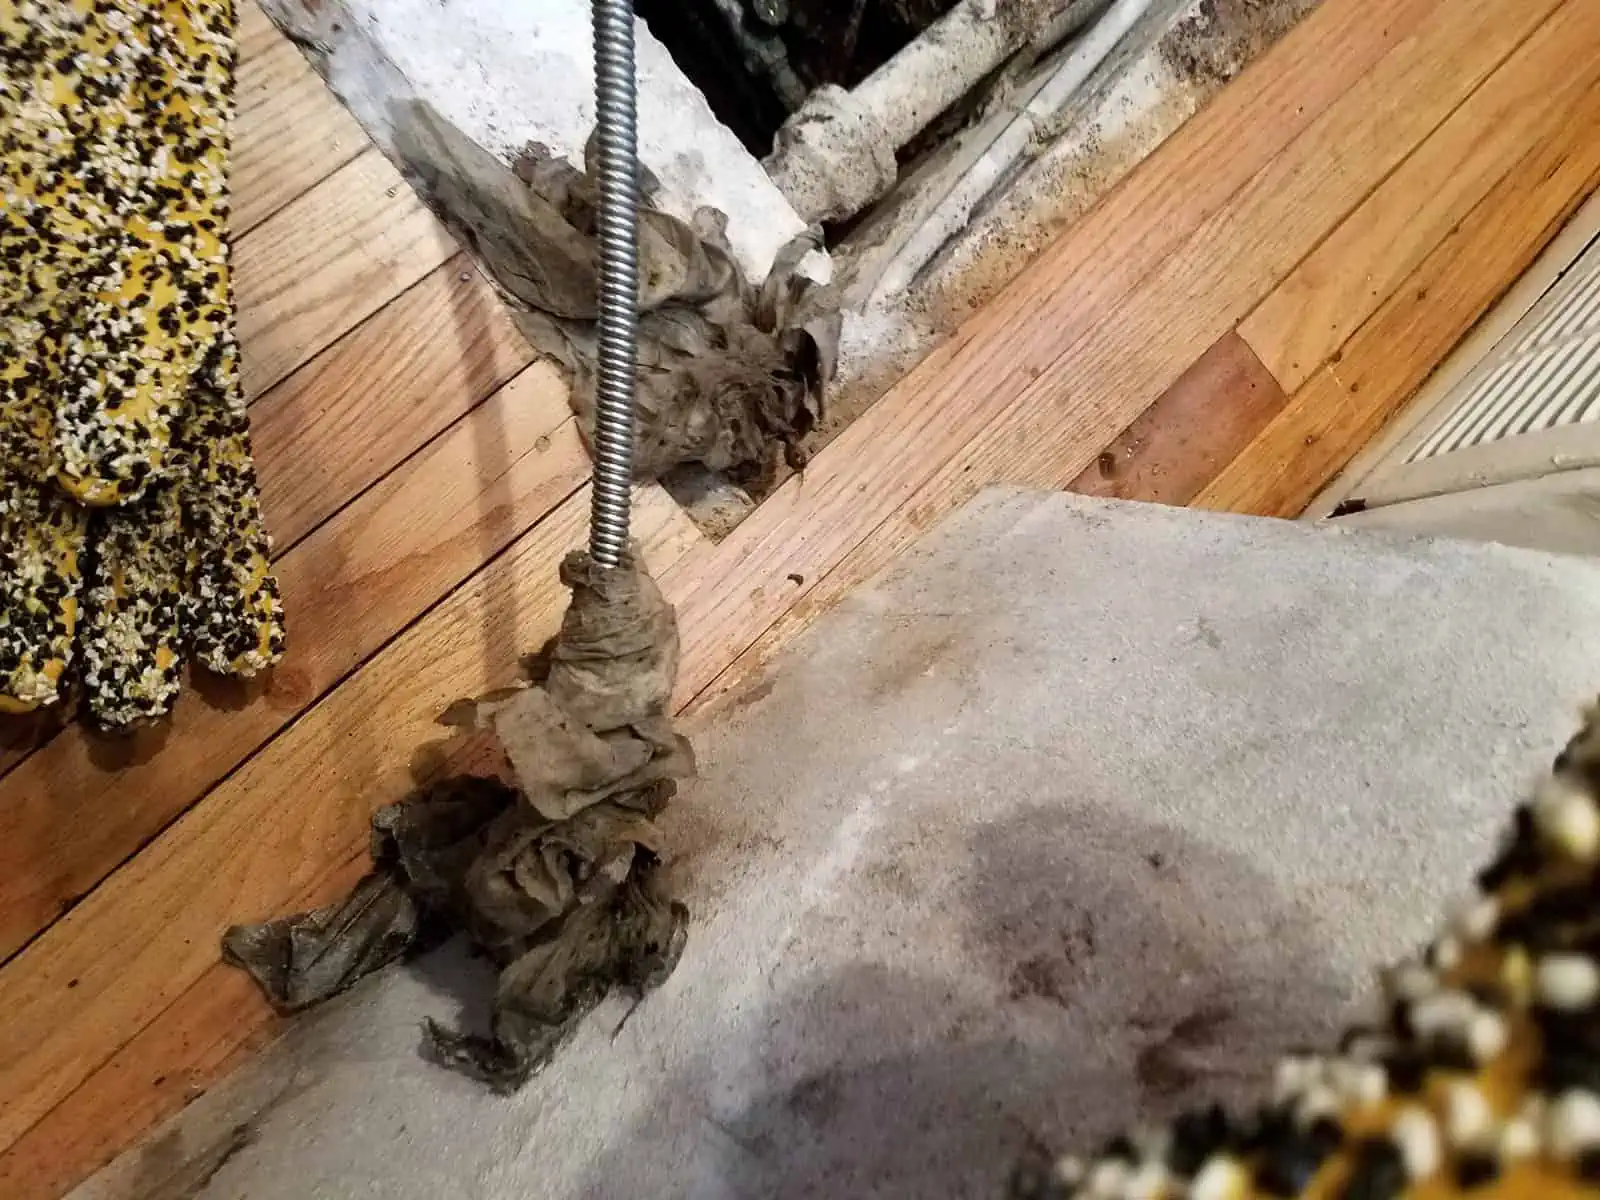 A sewer snake clearing flushible wipes out of a clogged drain line.